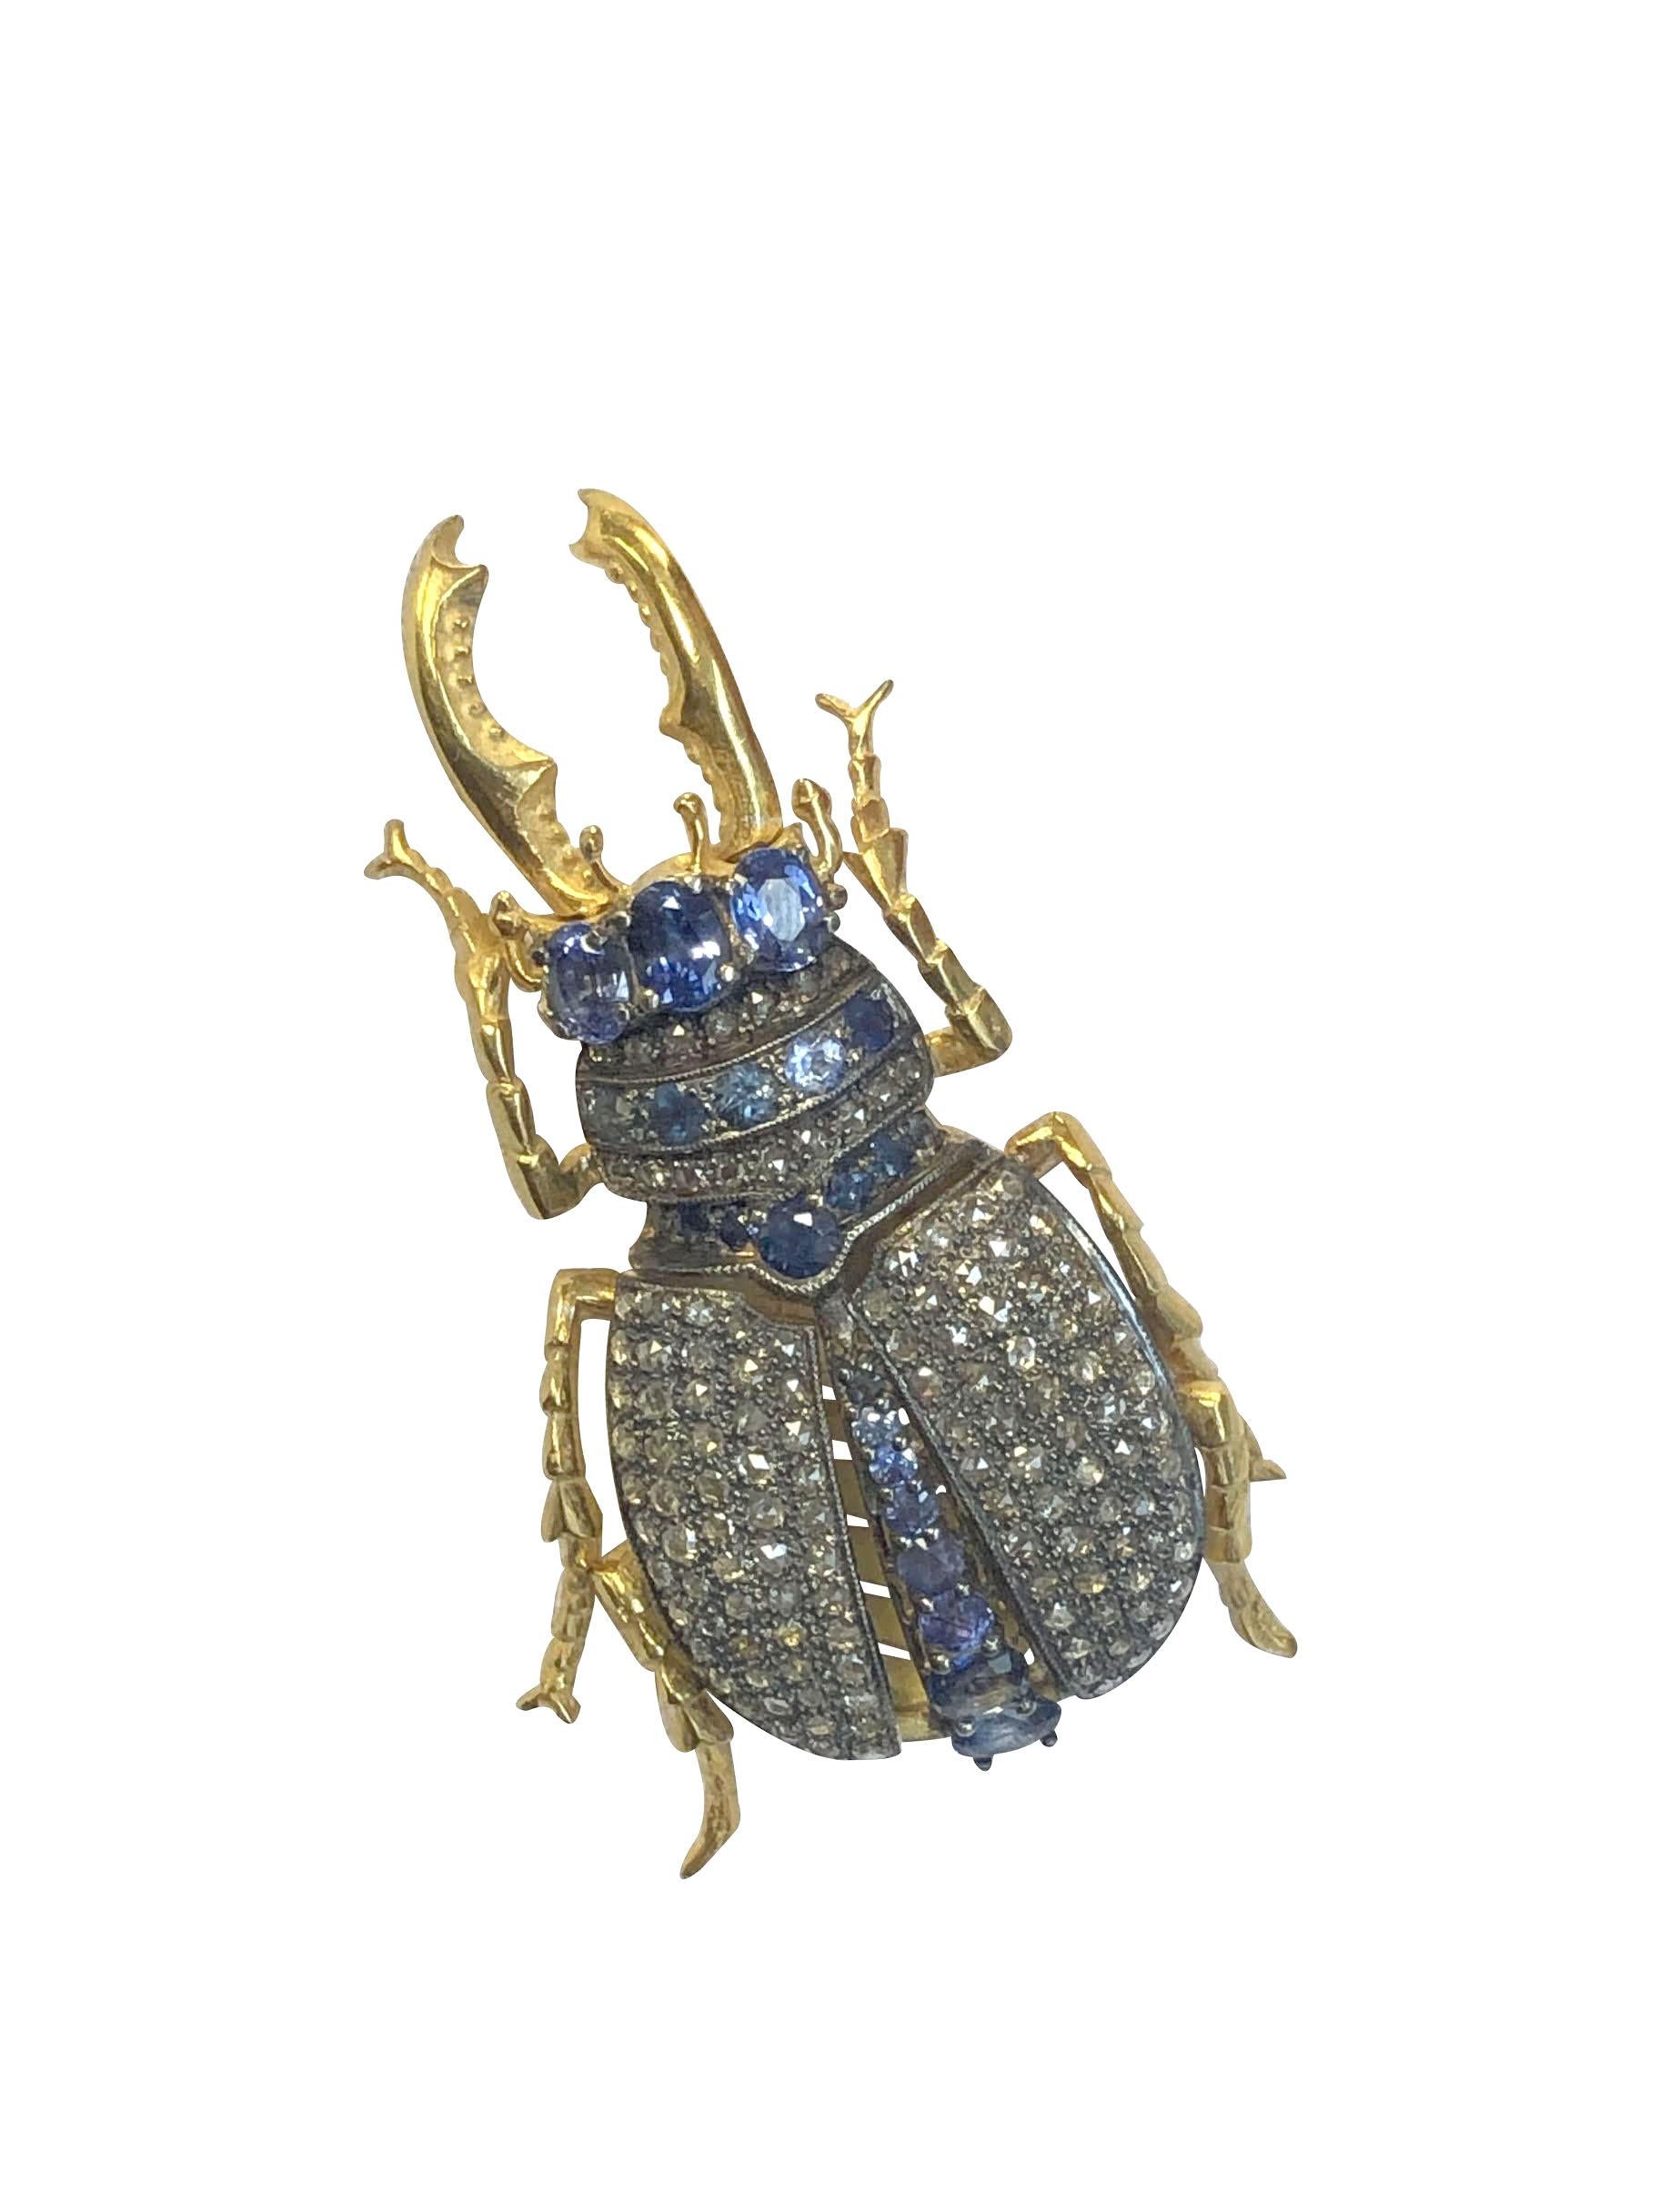 Large and impressive Beetle Form Brooch Pendant, measuring 2 1/4 inches in length X 1 1/4 inches wide, set with Rose cut Diamonds totaling approximately 2 Carats and further set with round and Oval Sapphires. This piece is masterfully Articulated,